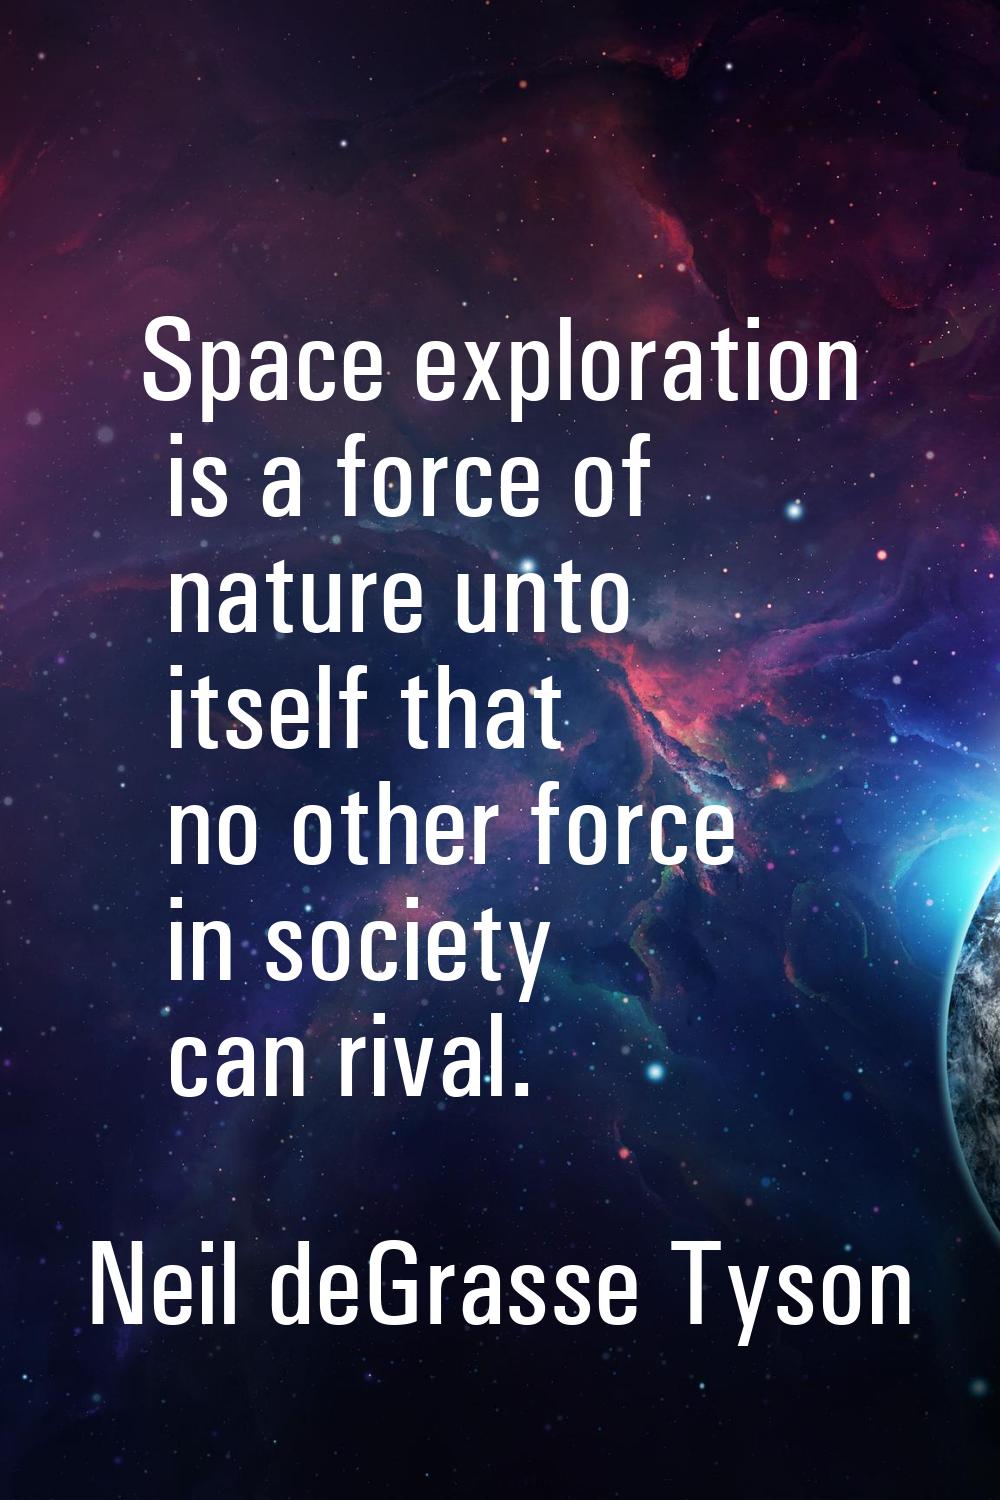 Space exploration is a force of nature unto itself that no other force in society can rival.